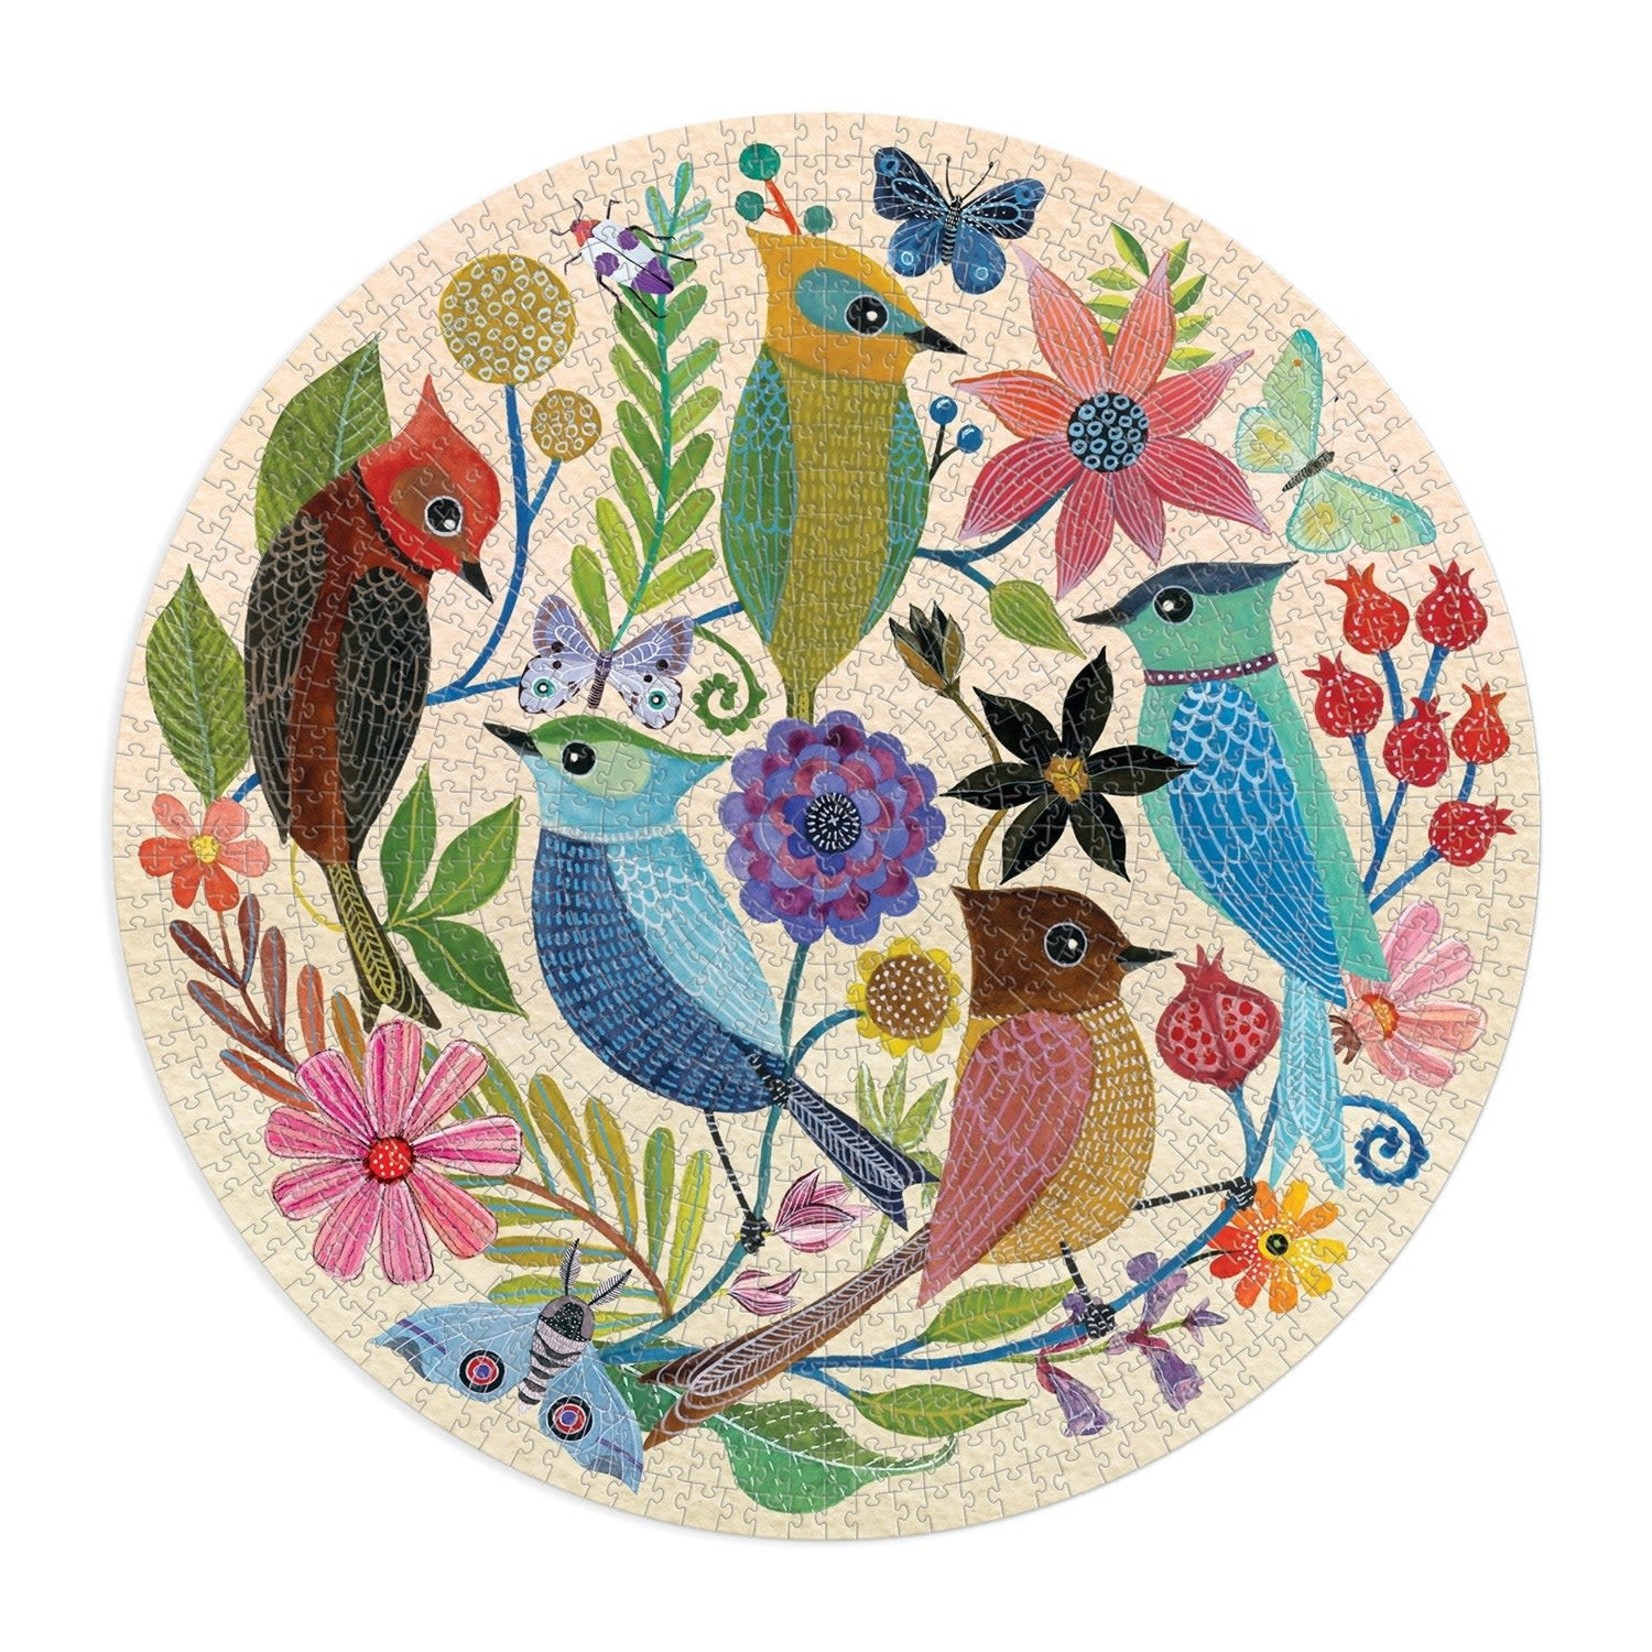 galison Circle of Avian Friends 1000 Piece Round Jigsaw Puzzle